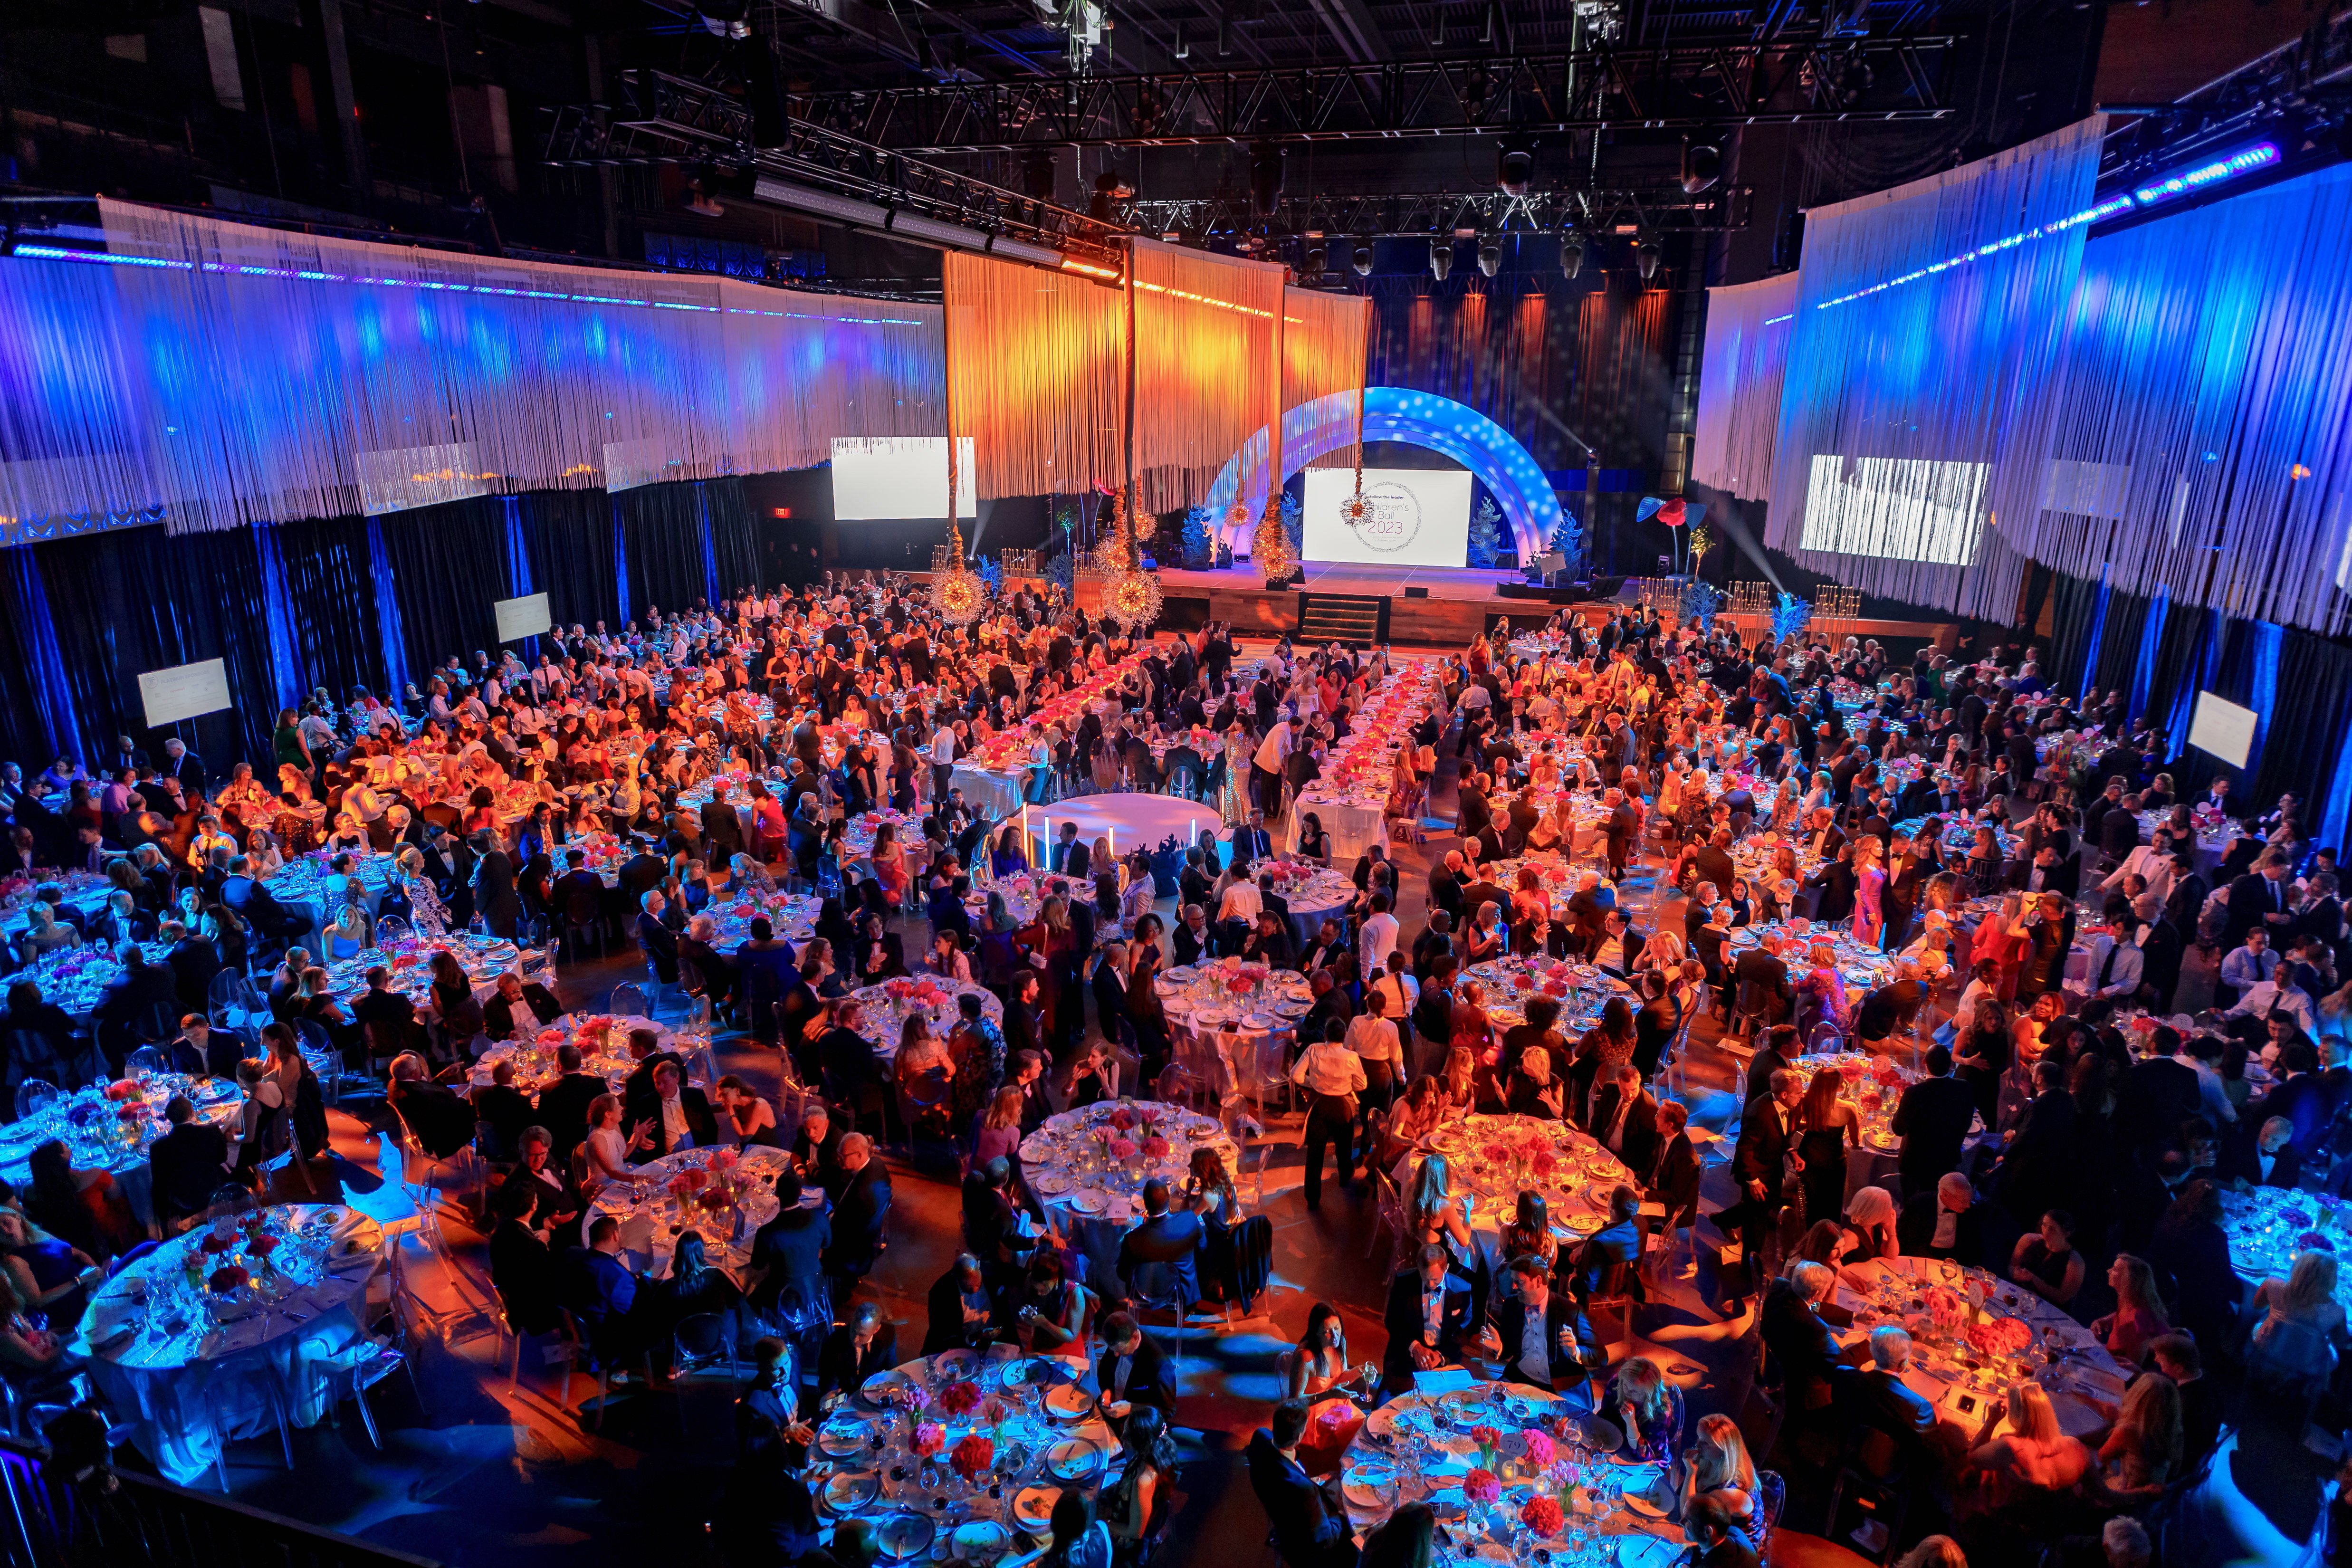 More than a thousand guests celebrate the future of pediatric health.